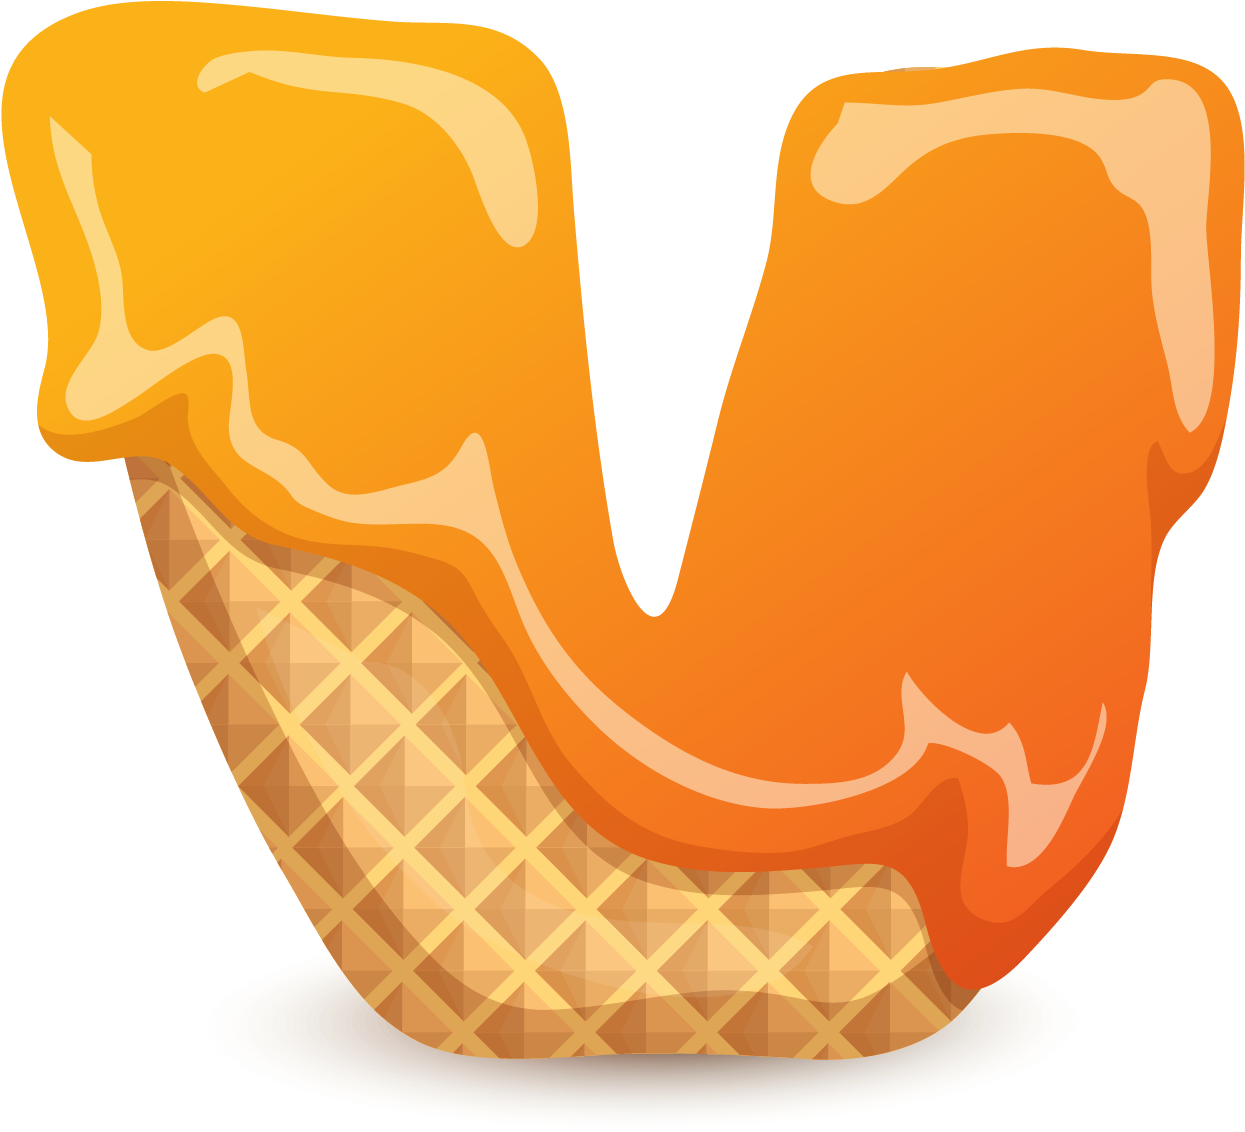 A Letter V Made Of Ice Cream